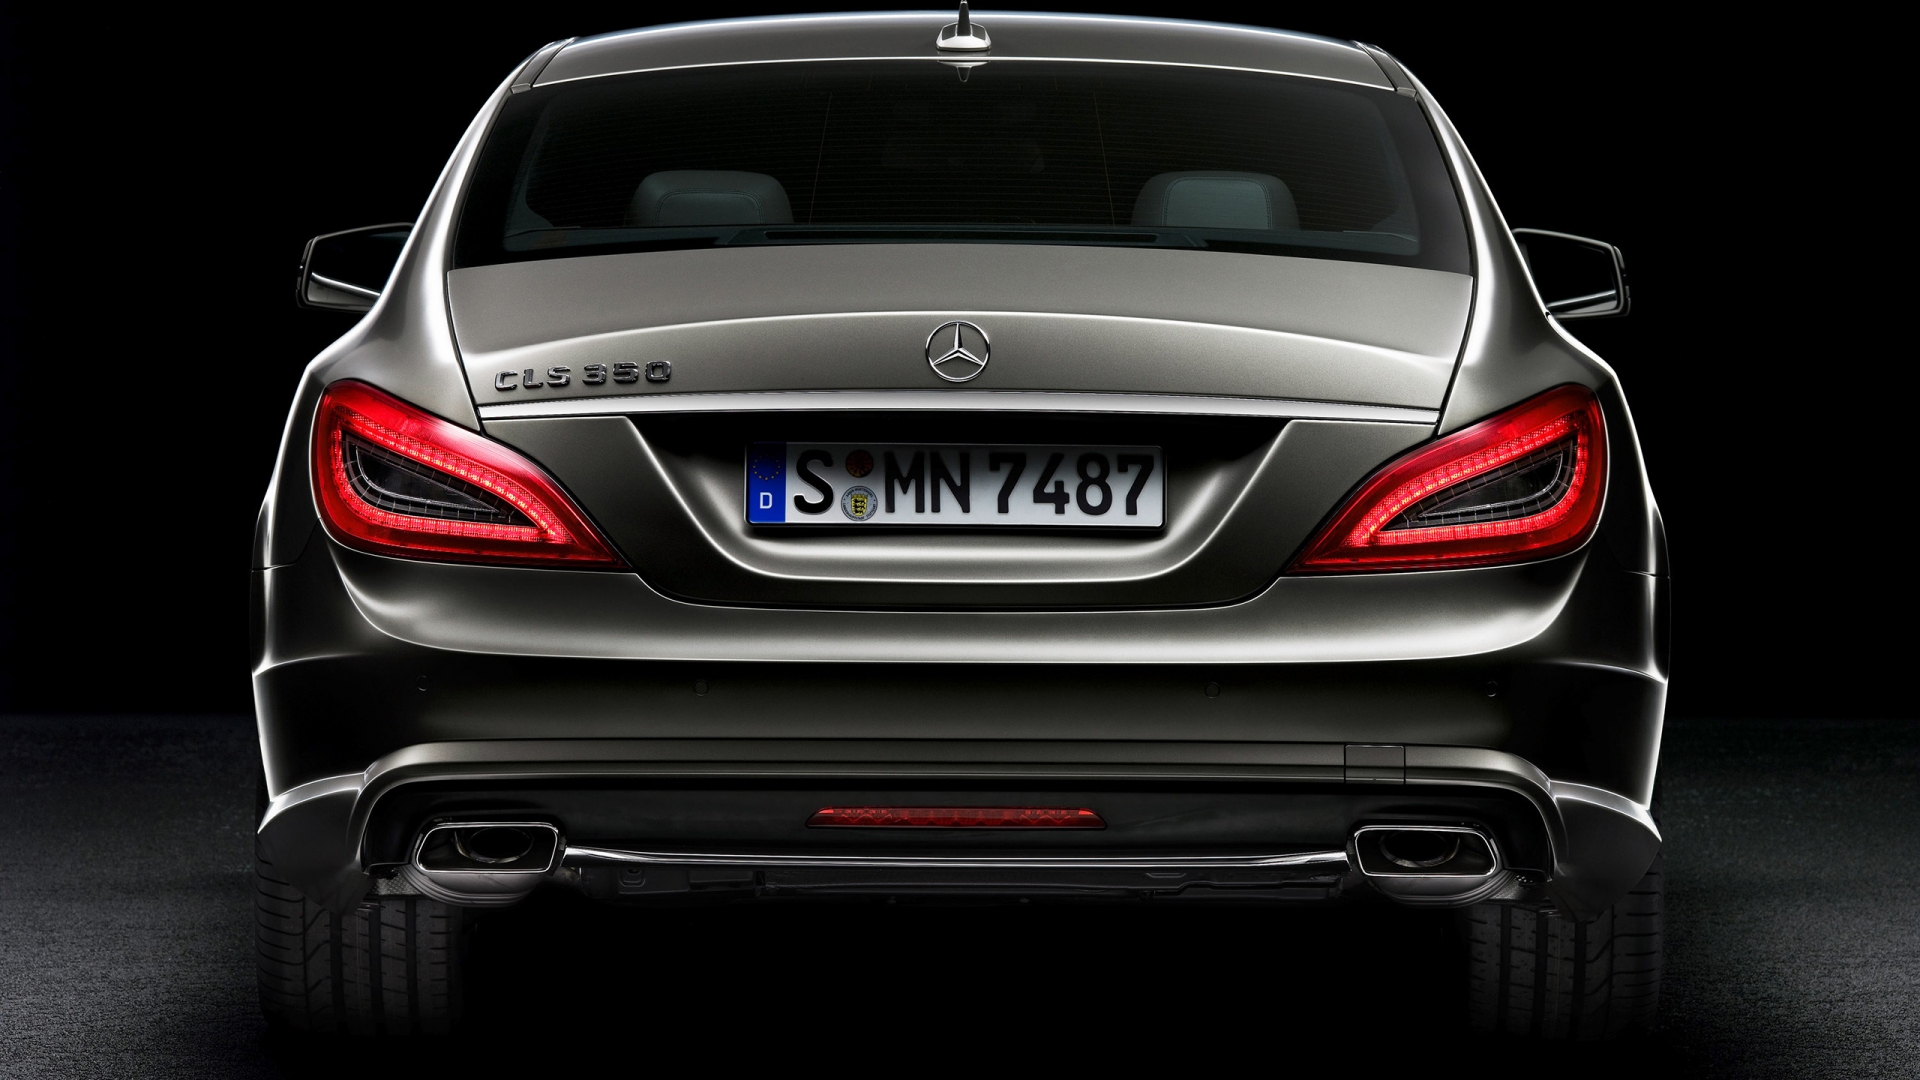 2012 Mercedes Benz CLS Rear for 1920 x 1080 HDTV 1080p resolution